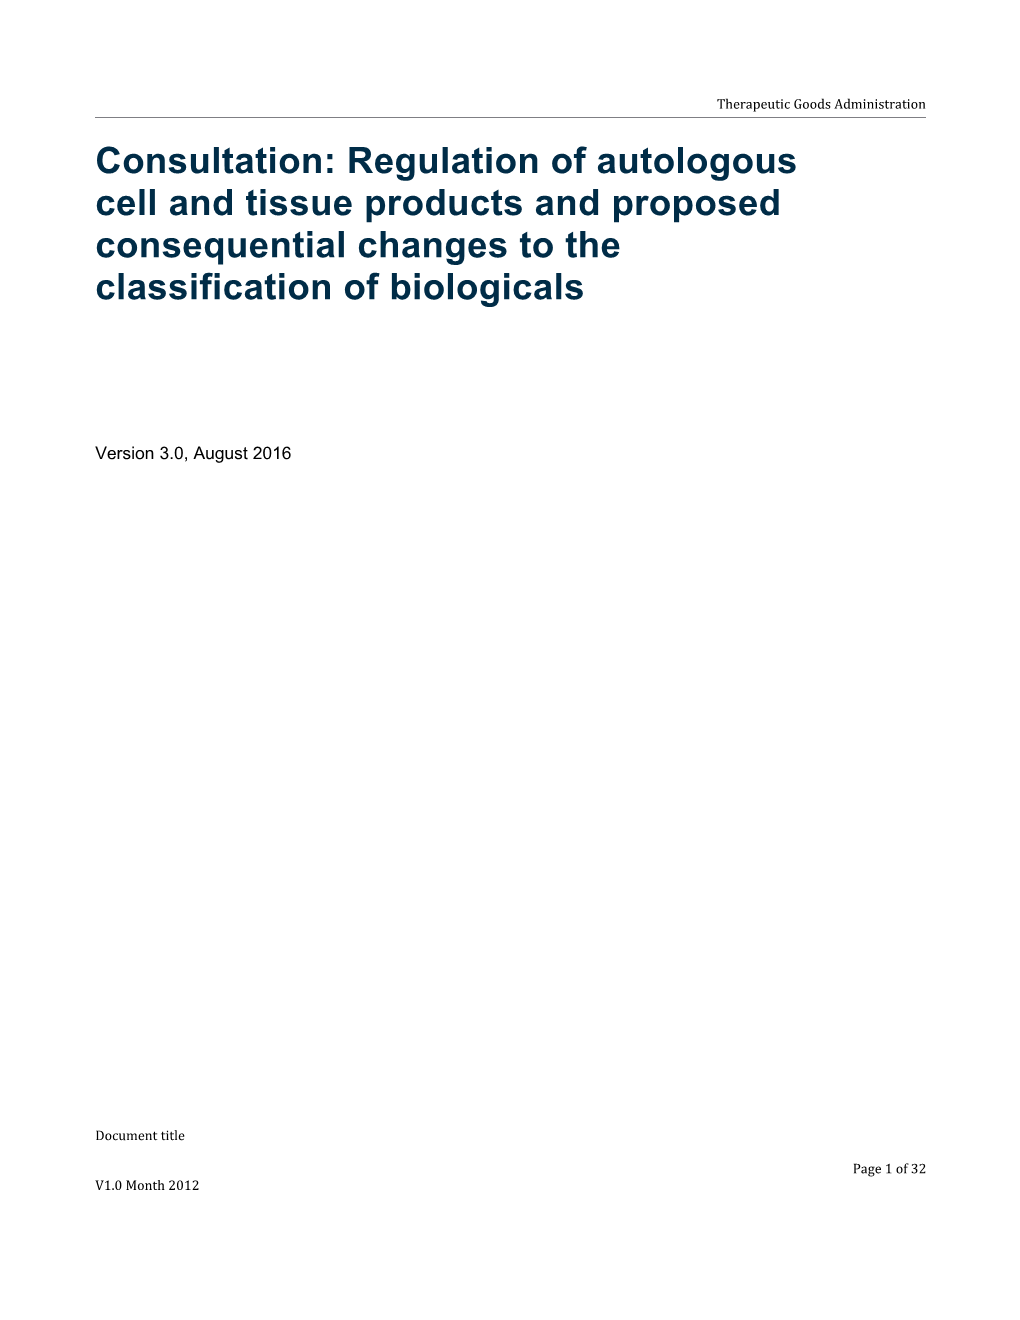 Consultation: Regulation of Autologous Cell and Tissue Products and Proposed Consequential